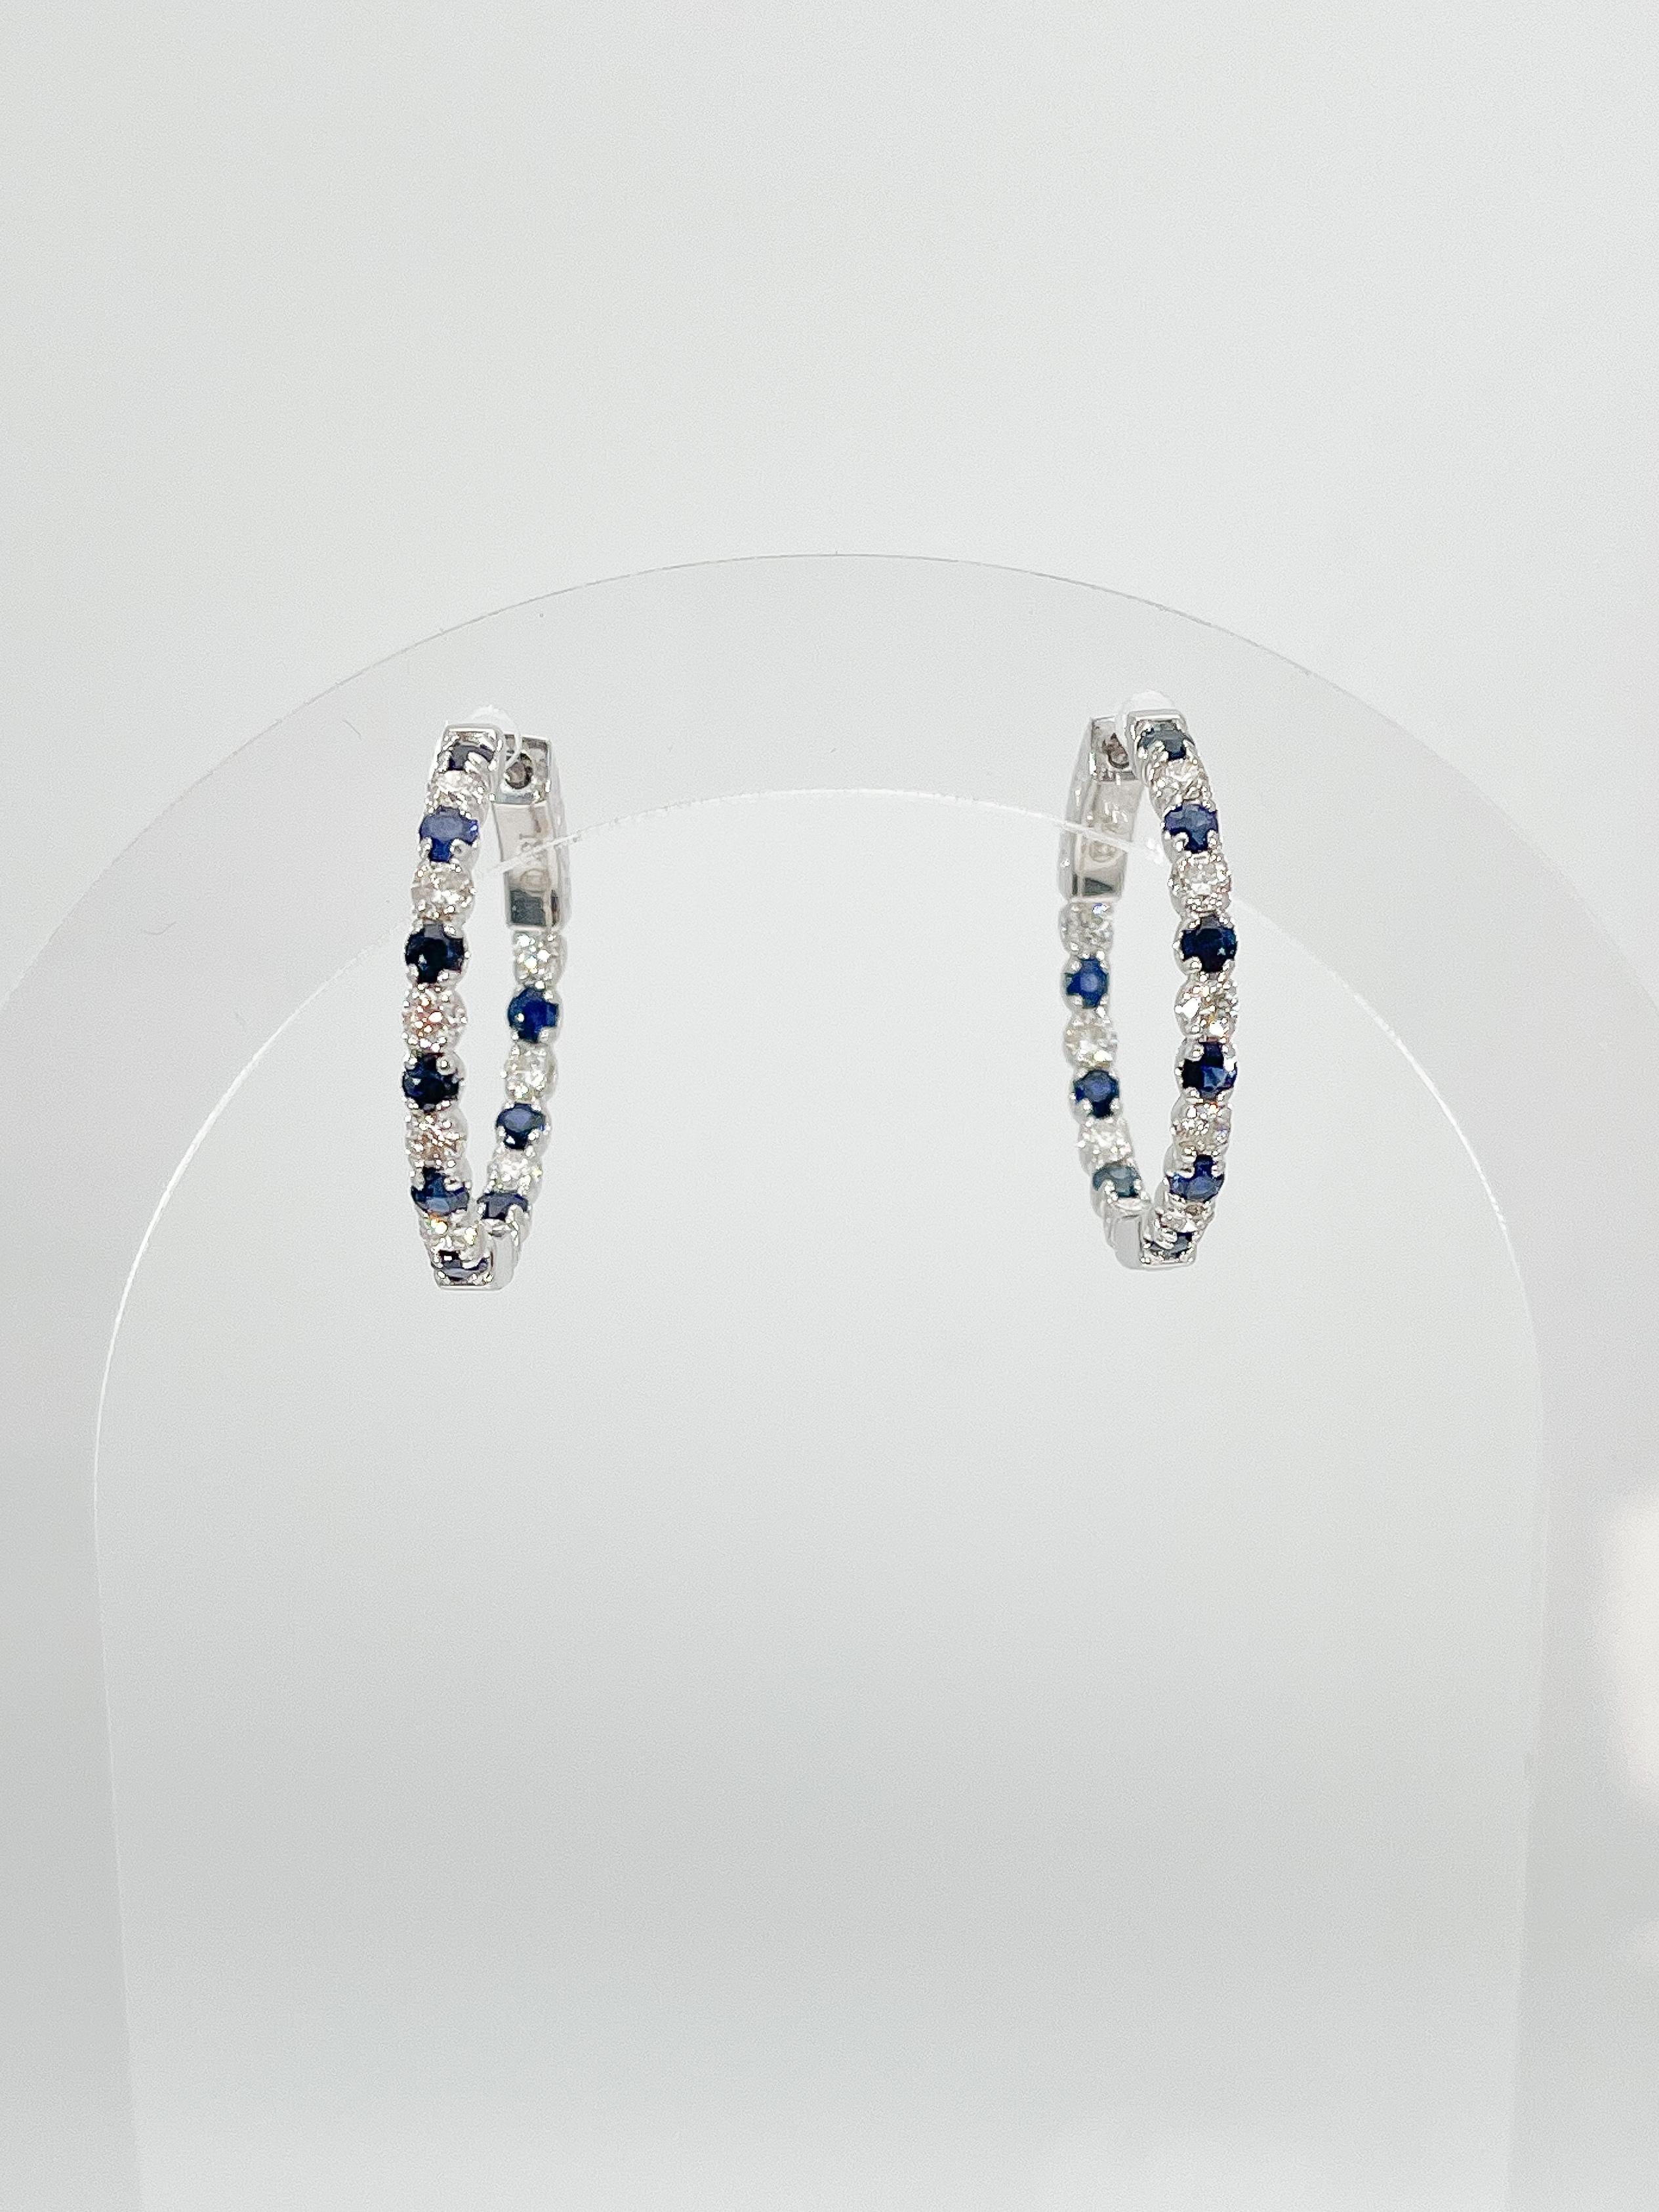 14k white gold .79 CTW diamond and 1.15 CTW sapphire hoop earrings. The stones in these earrings are all round, the measurements are 23 x 23.3 mm, and they have a total weight of 5 grams. 